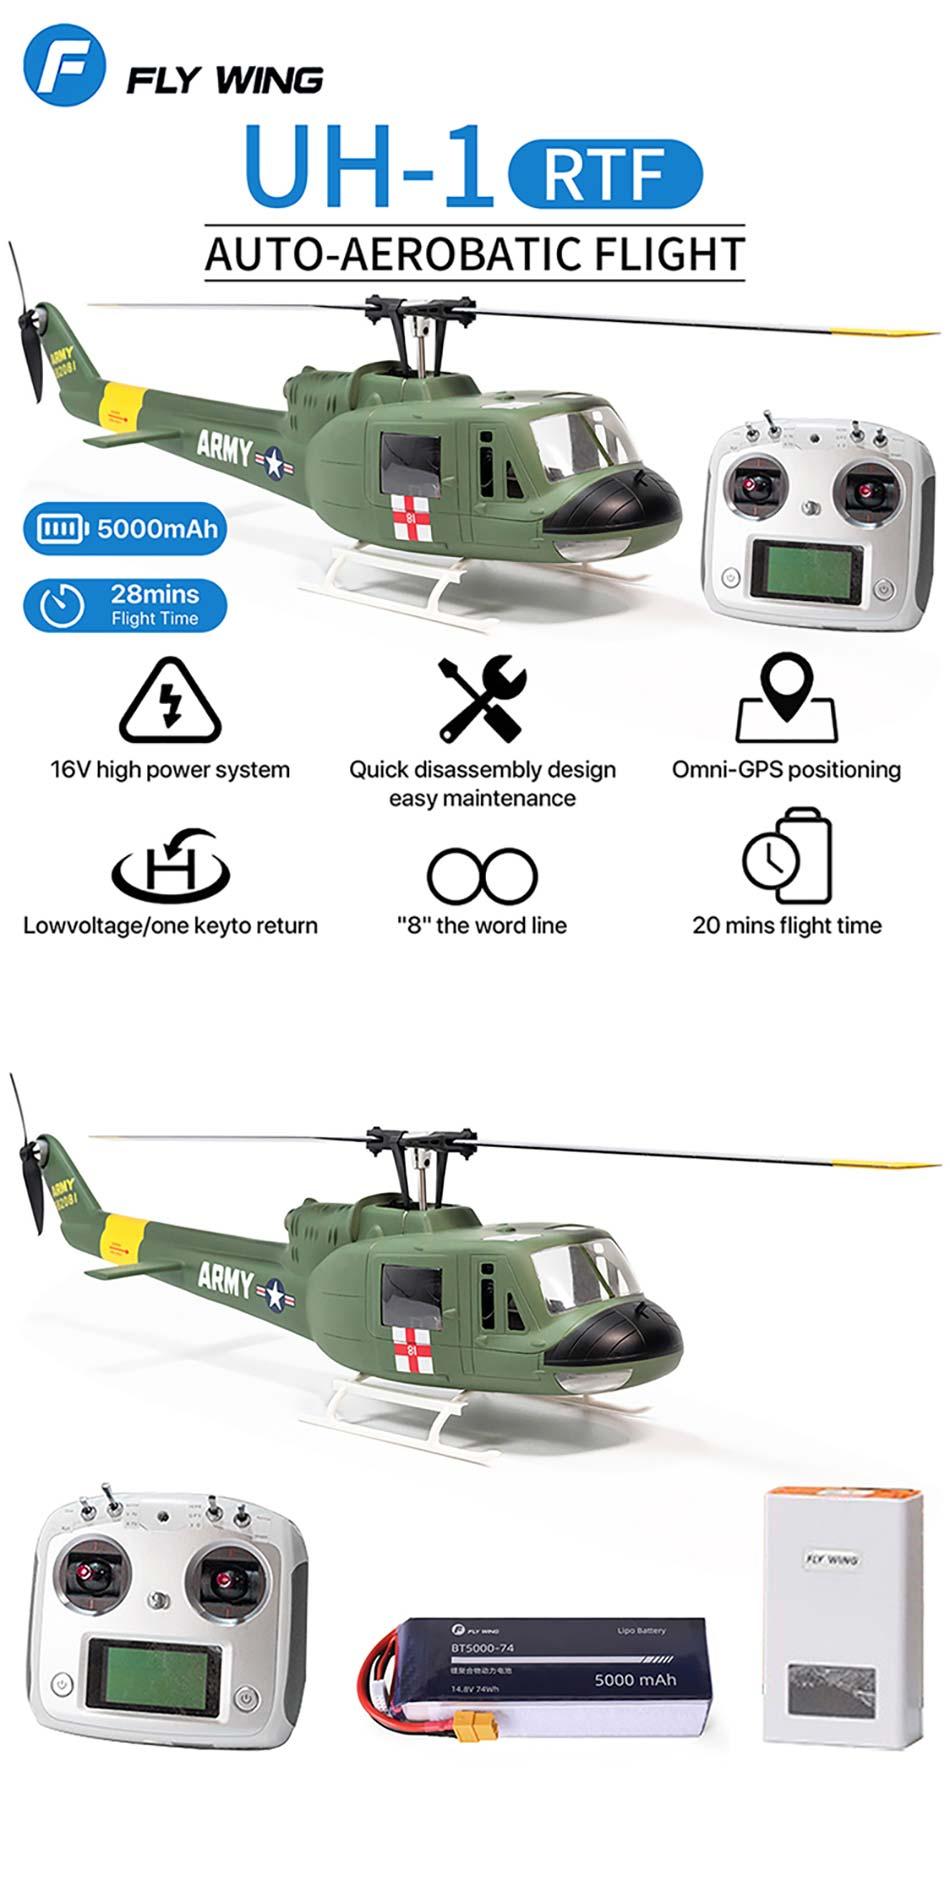 Uh 1 Huey Rc Helicopter For Sale: Key Factors to Consider Before Purchasing an UH-1 Huey RC Helicopter